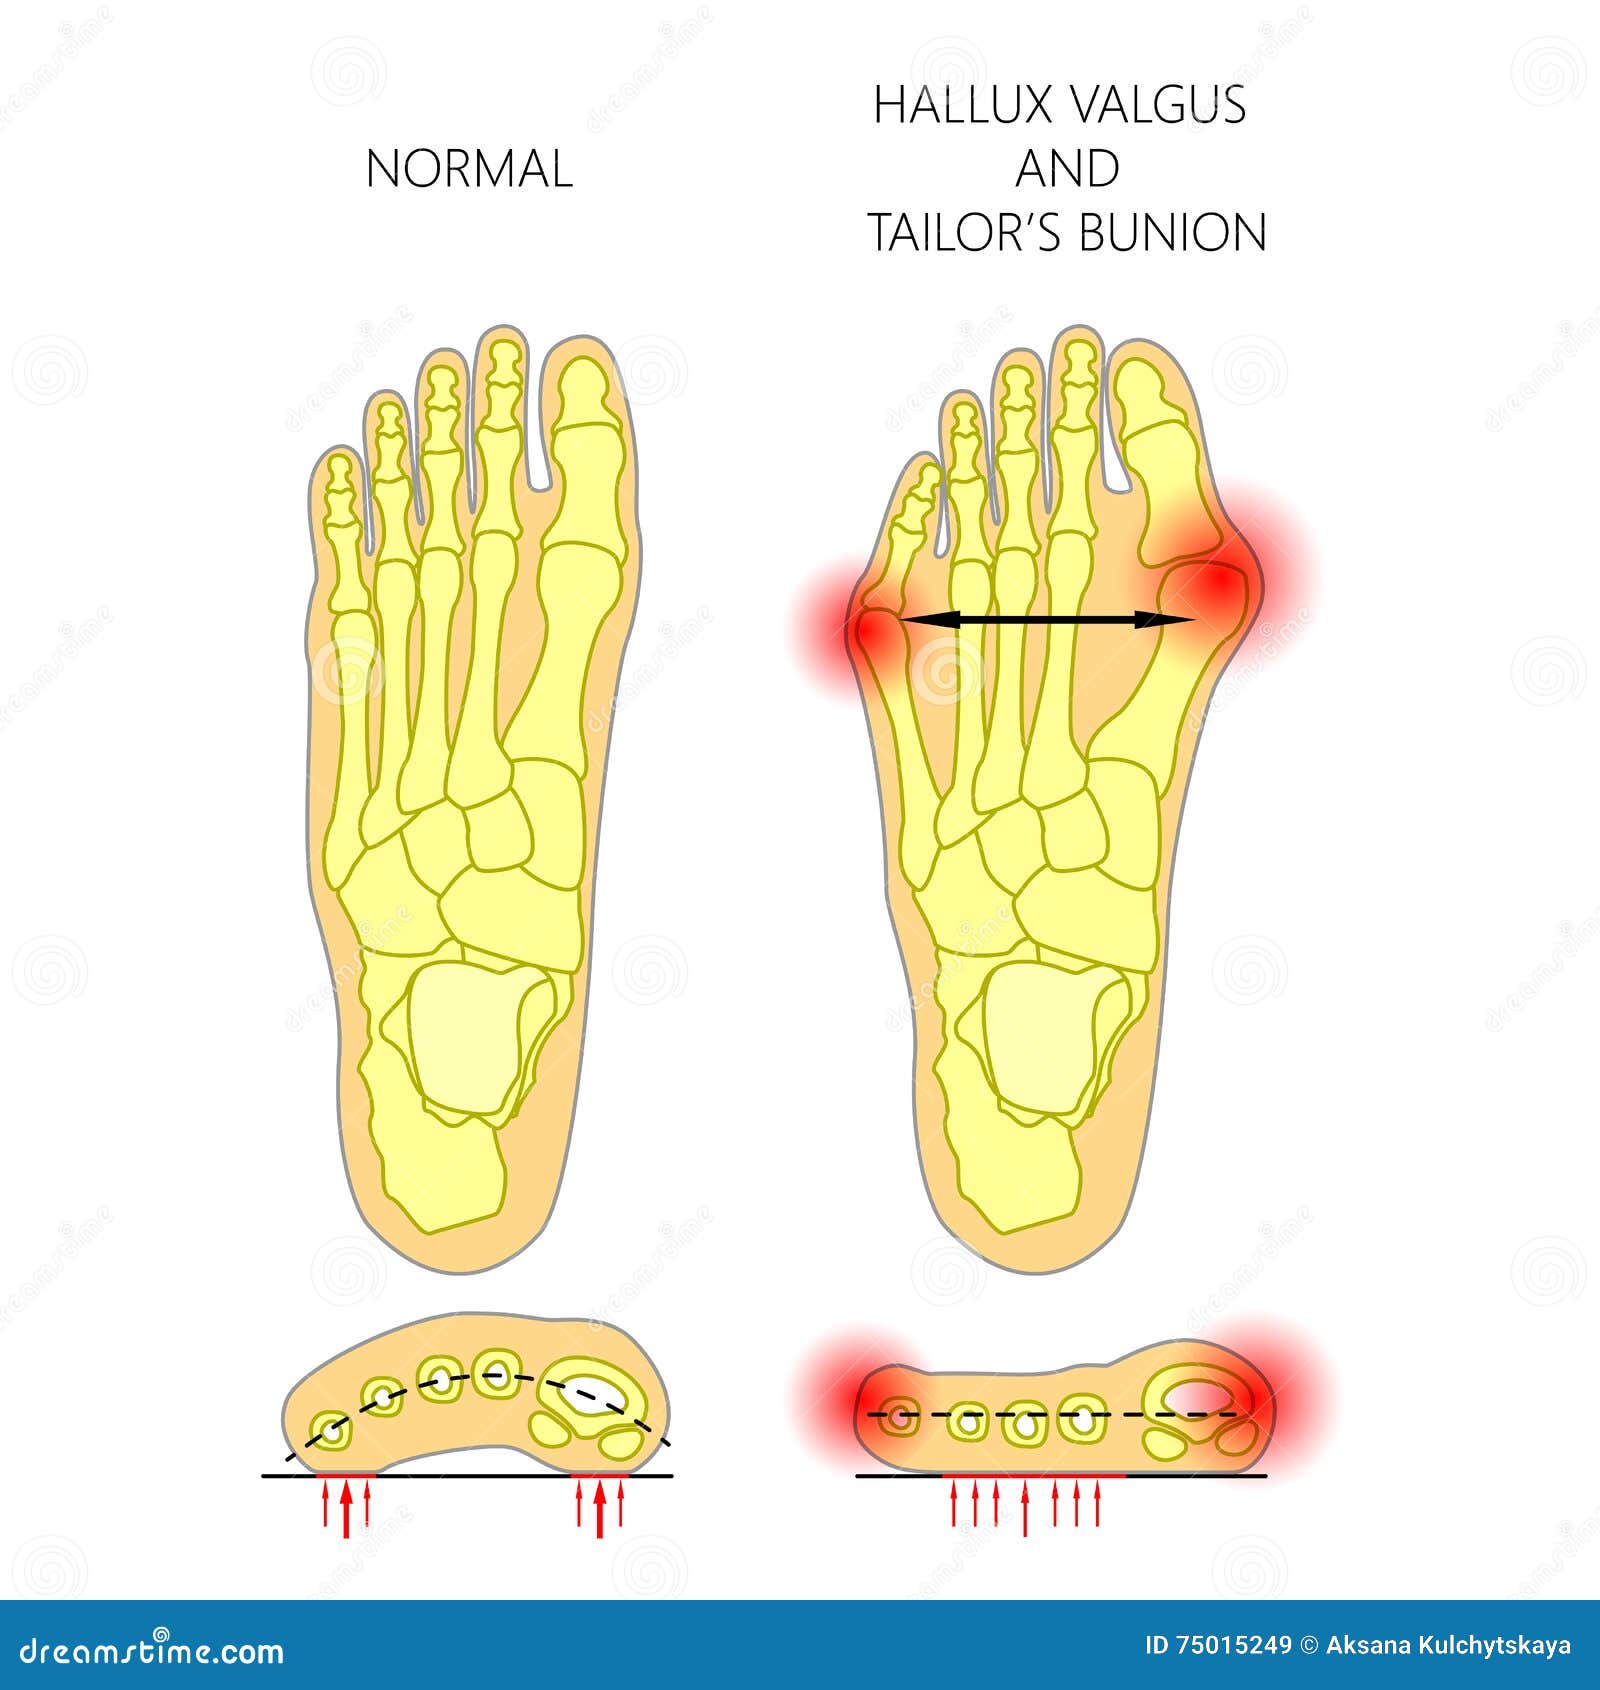 deviation of the first and the fifth metatarsals transverse flat